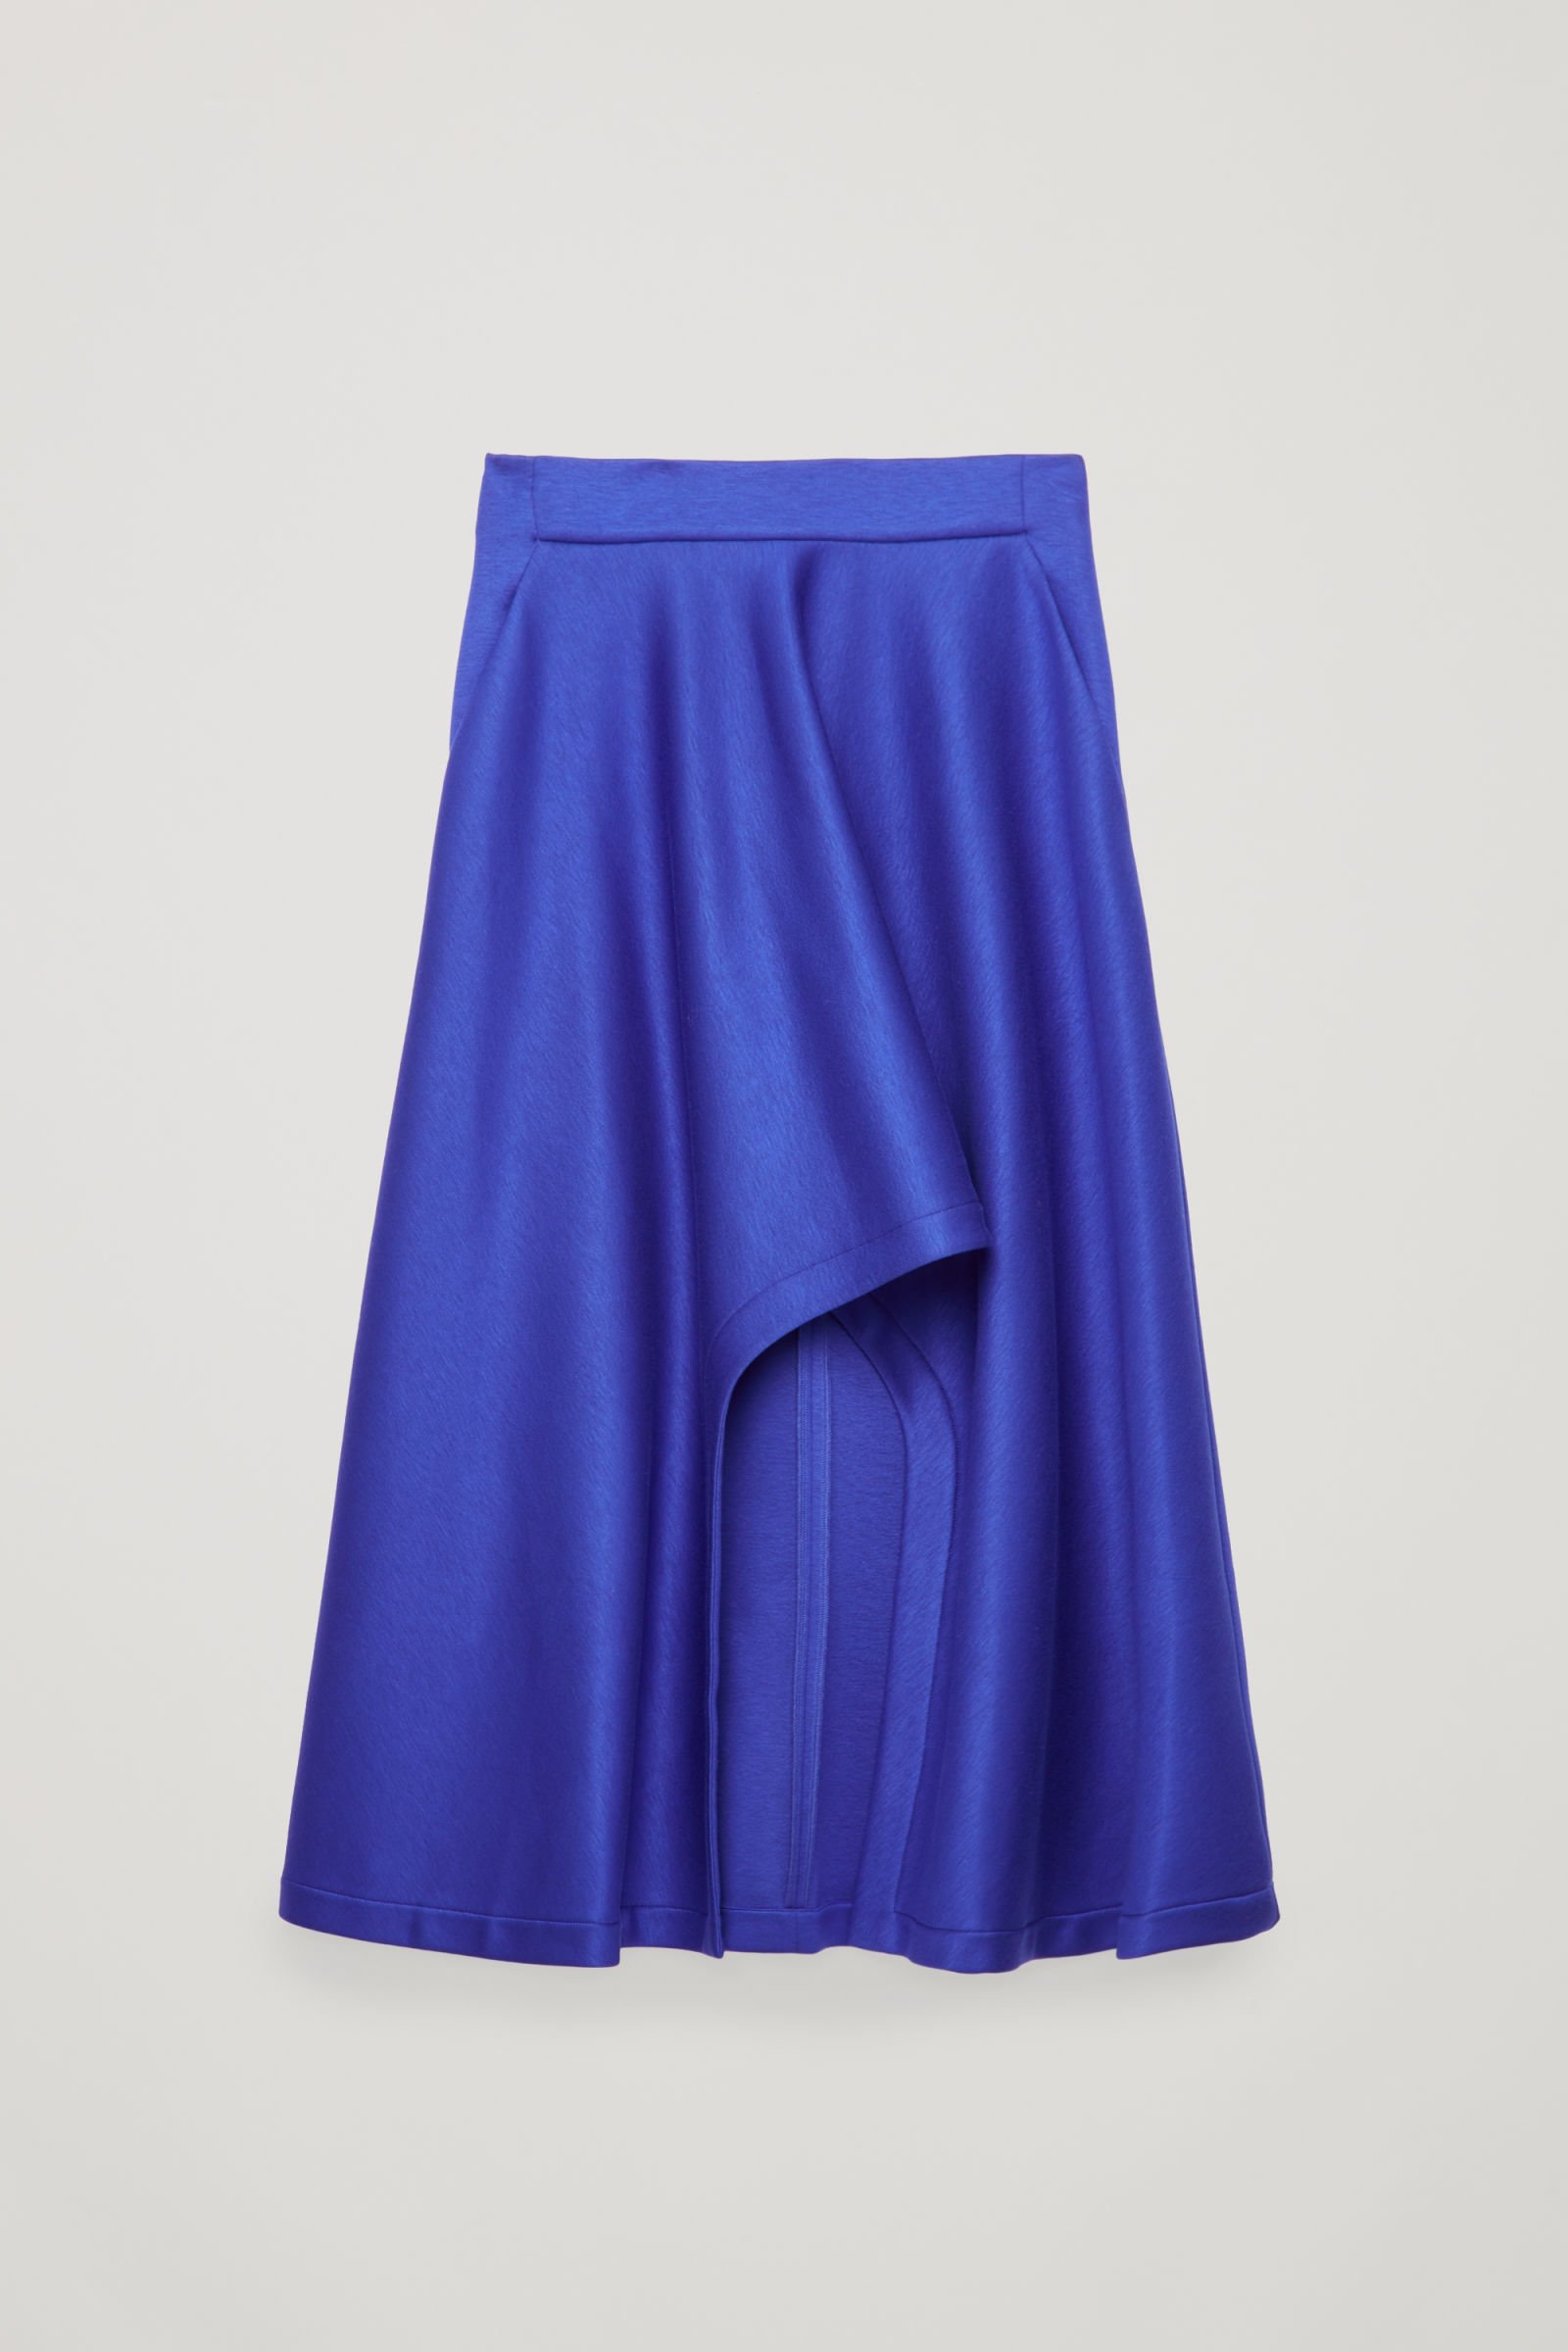 COS Cut-Out Long Jersey Skirt in Royal blue | Endource